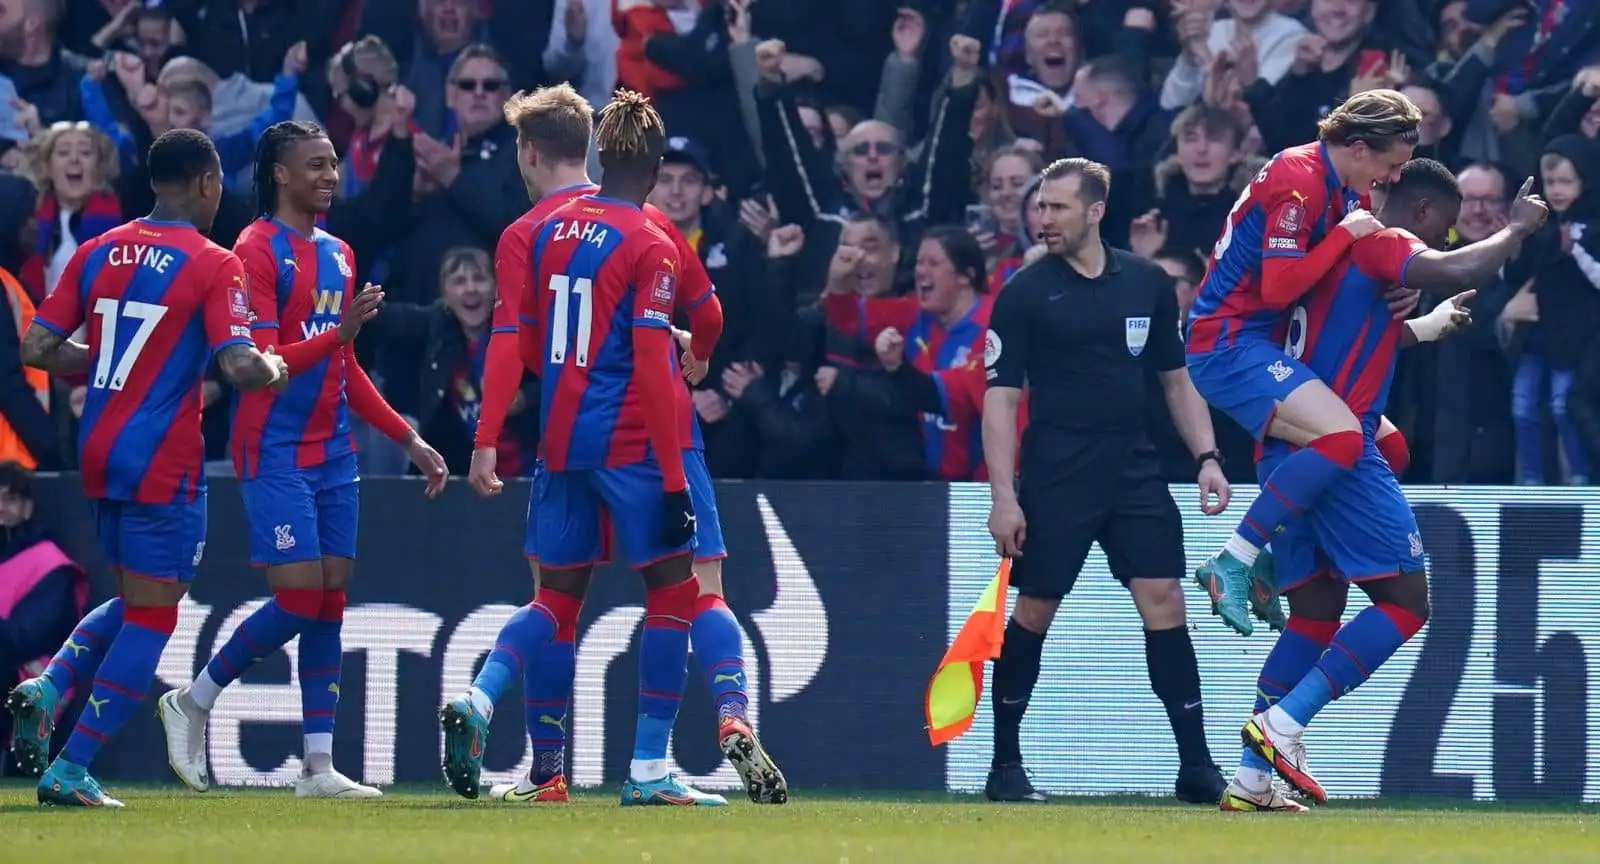 Marc Guehi Crystal Palace FA Cup goal celeb against Everton at Selhurst Park